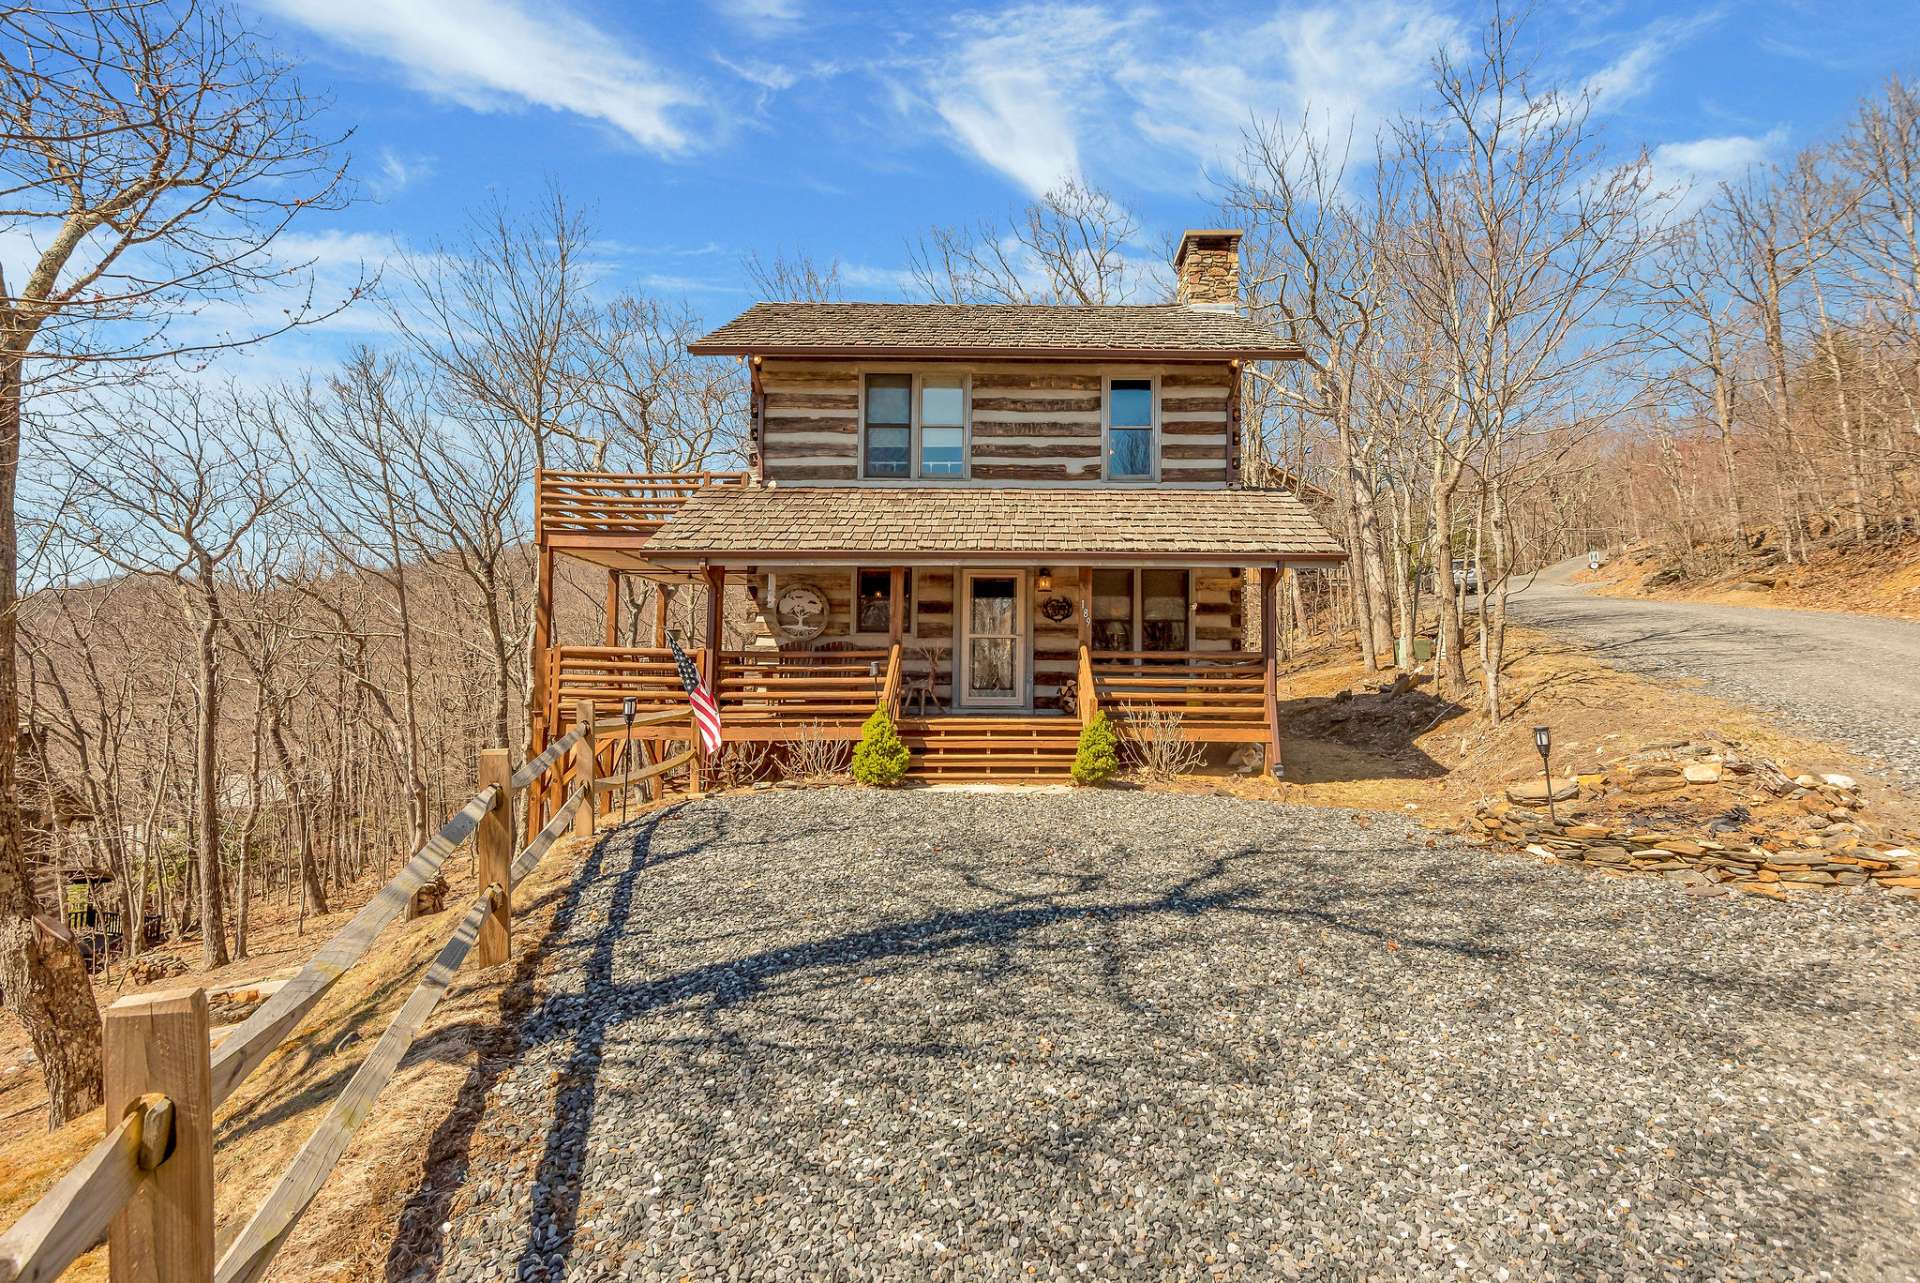 Indulge in your North Carolina mountain dreams of owning a rustic cabin.